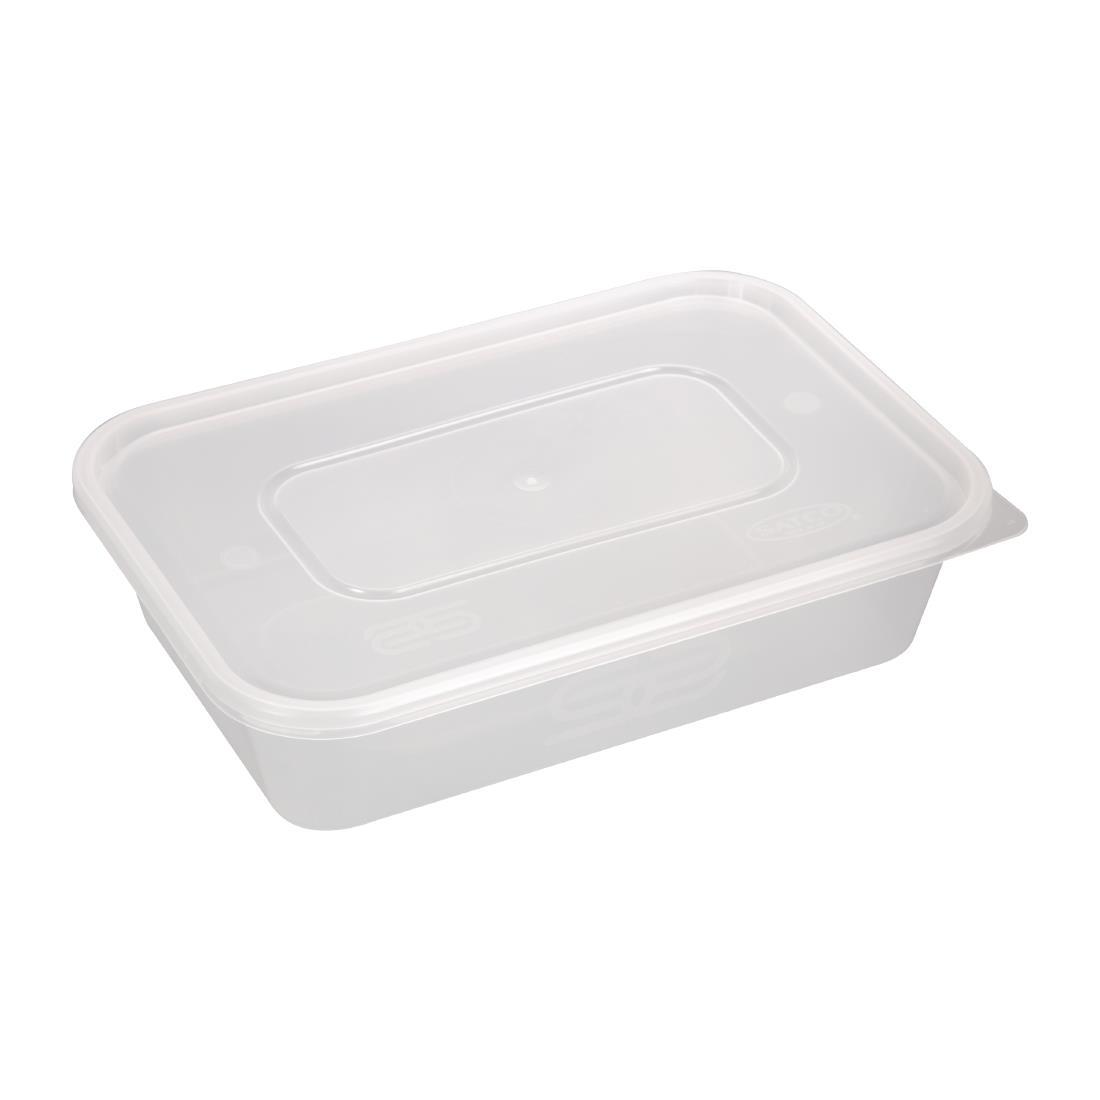 Premium Takeaway Food Containers With Lid 500ml / 18oz (Pack of 250) - FC090  - 1